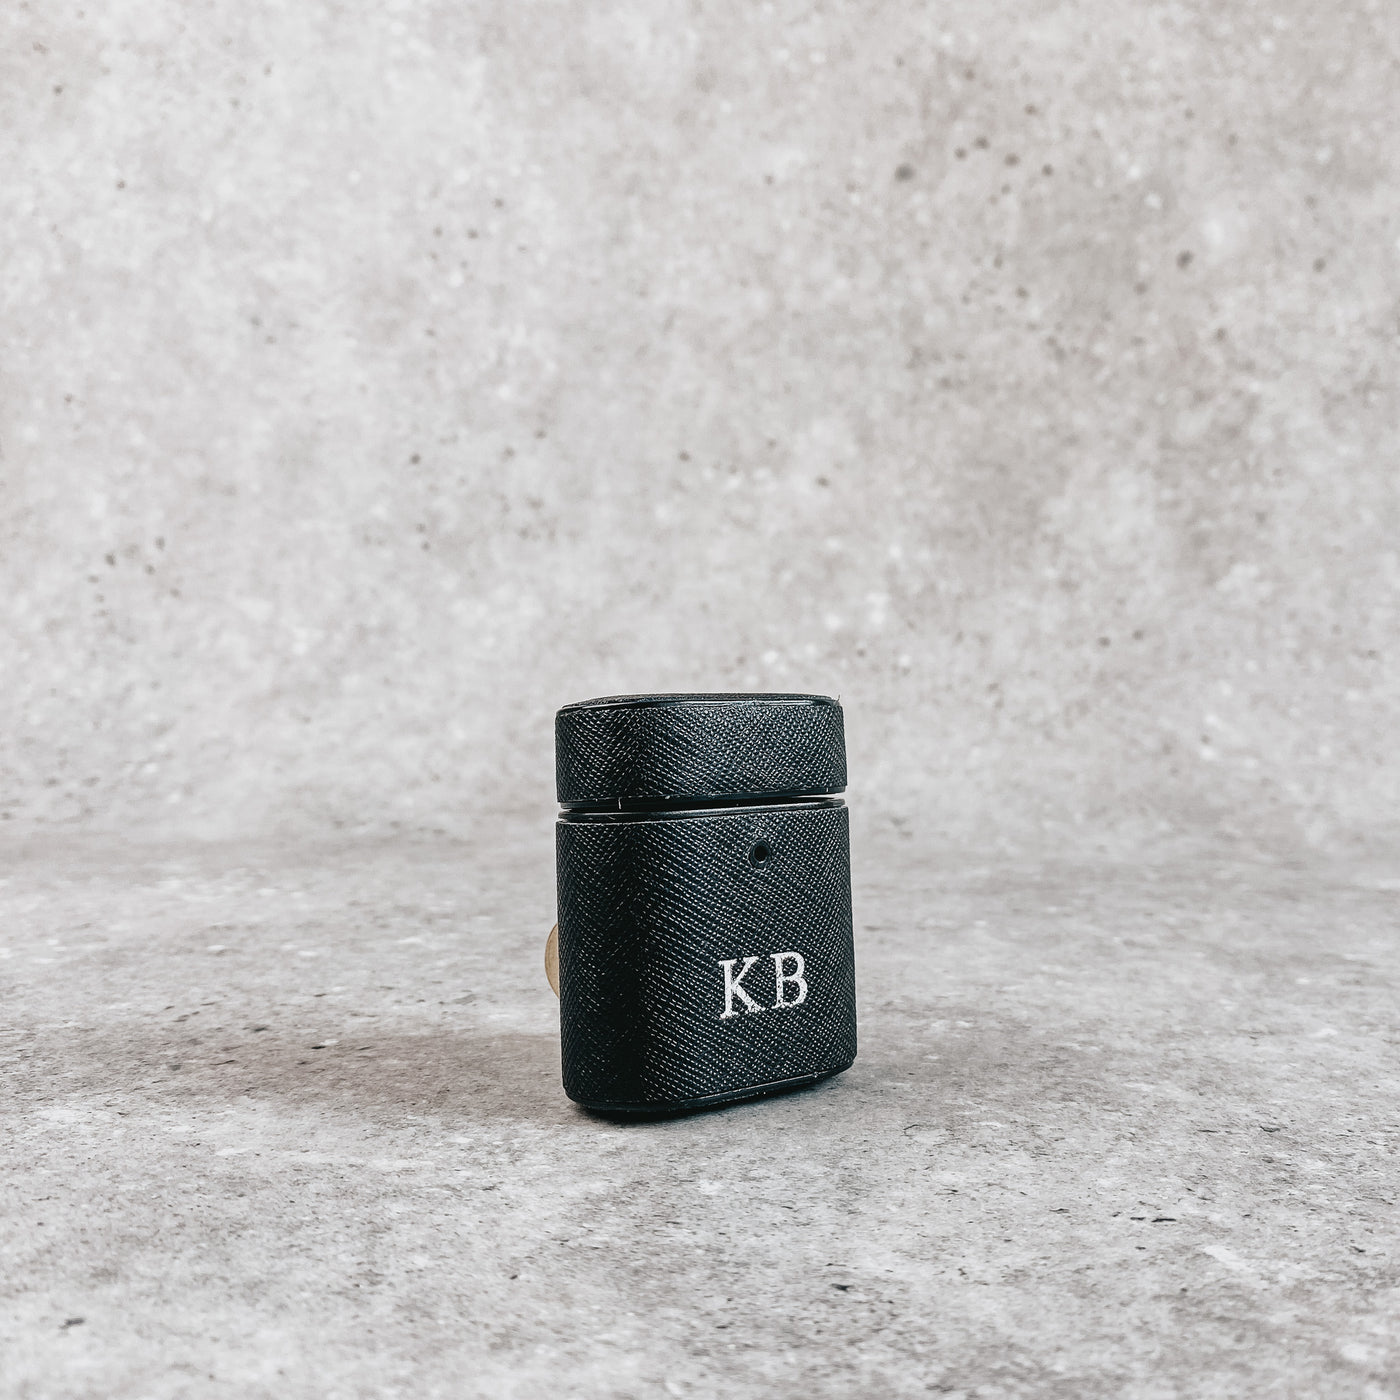 Black AirPod holder, embossed with silver initials